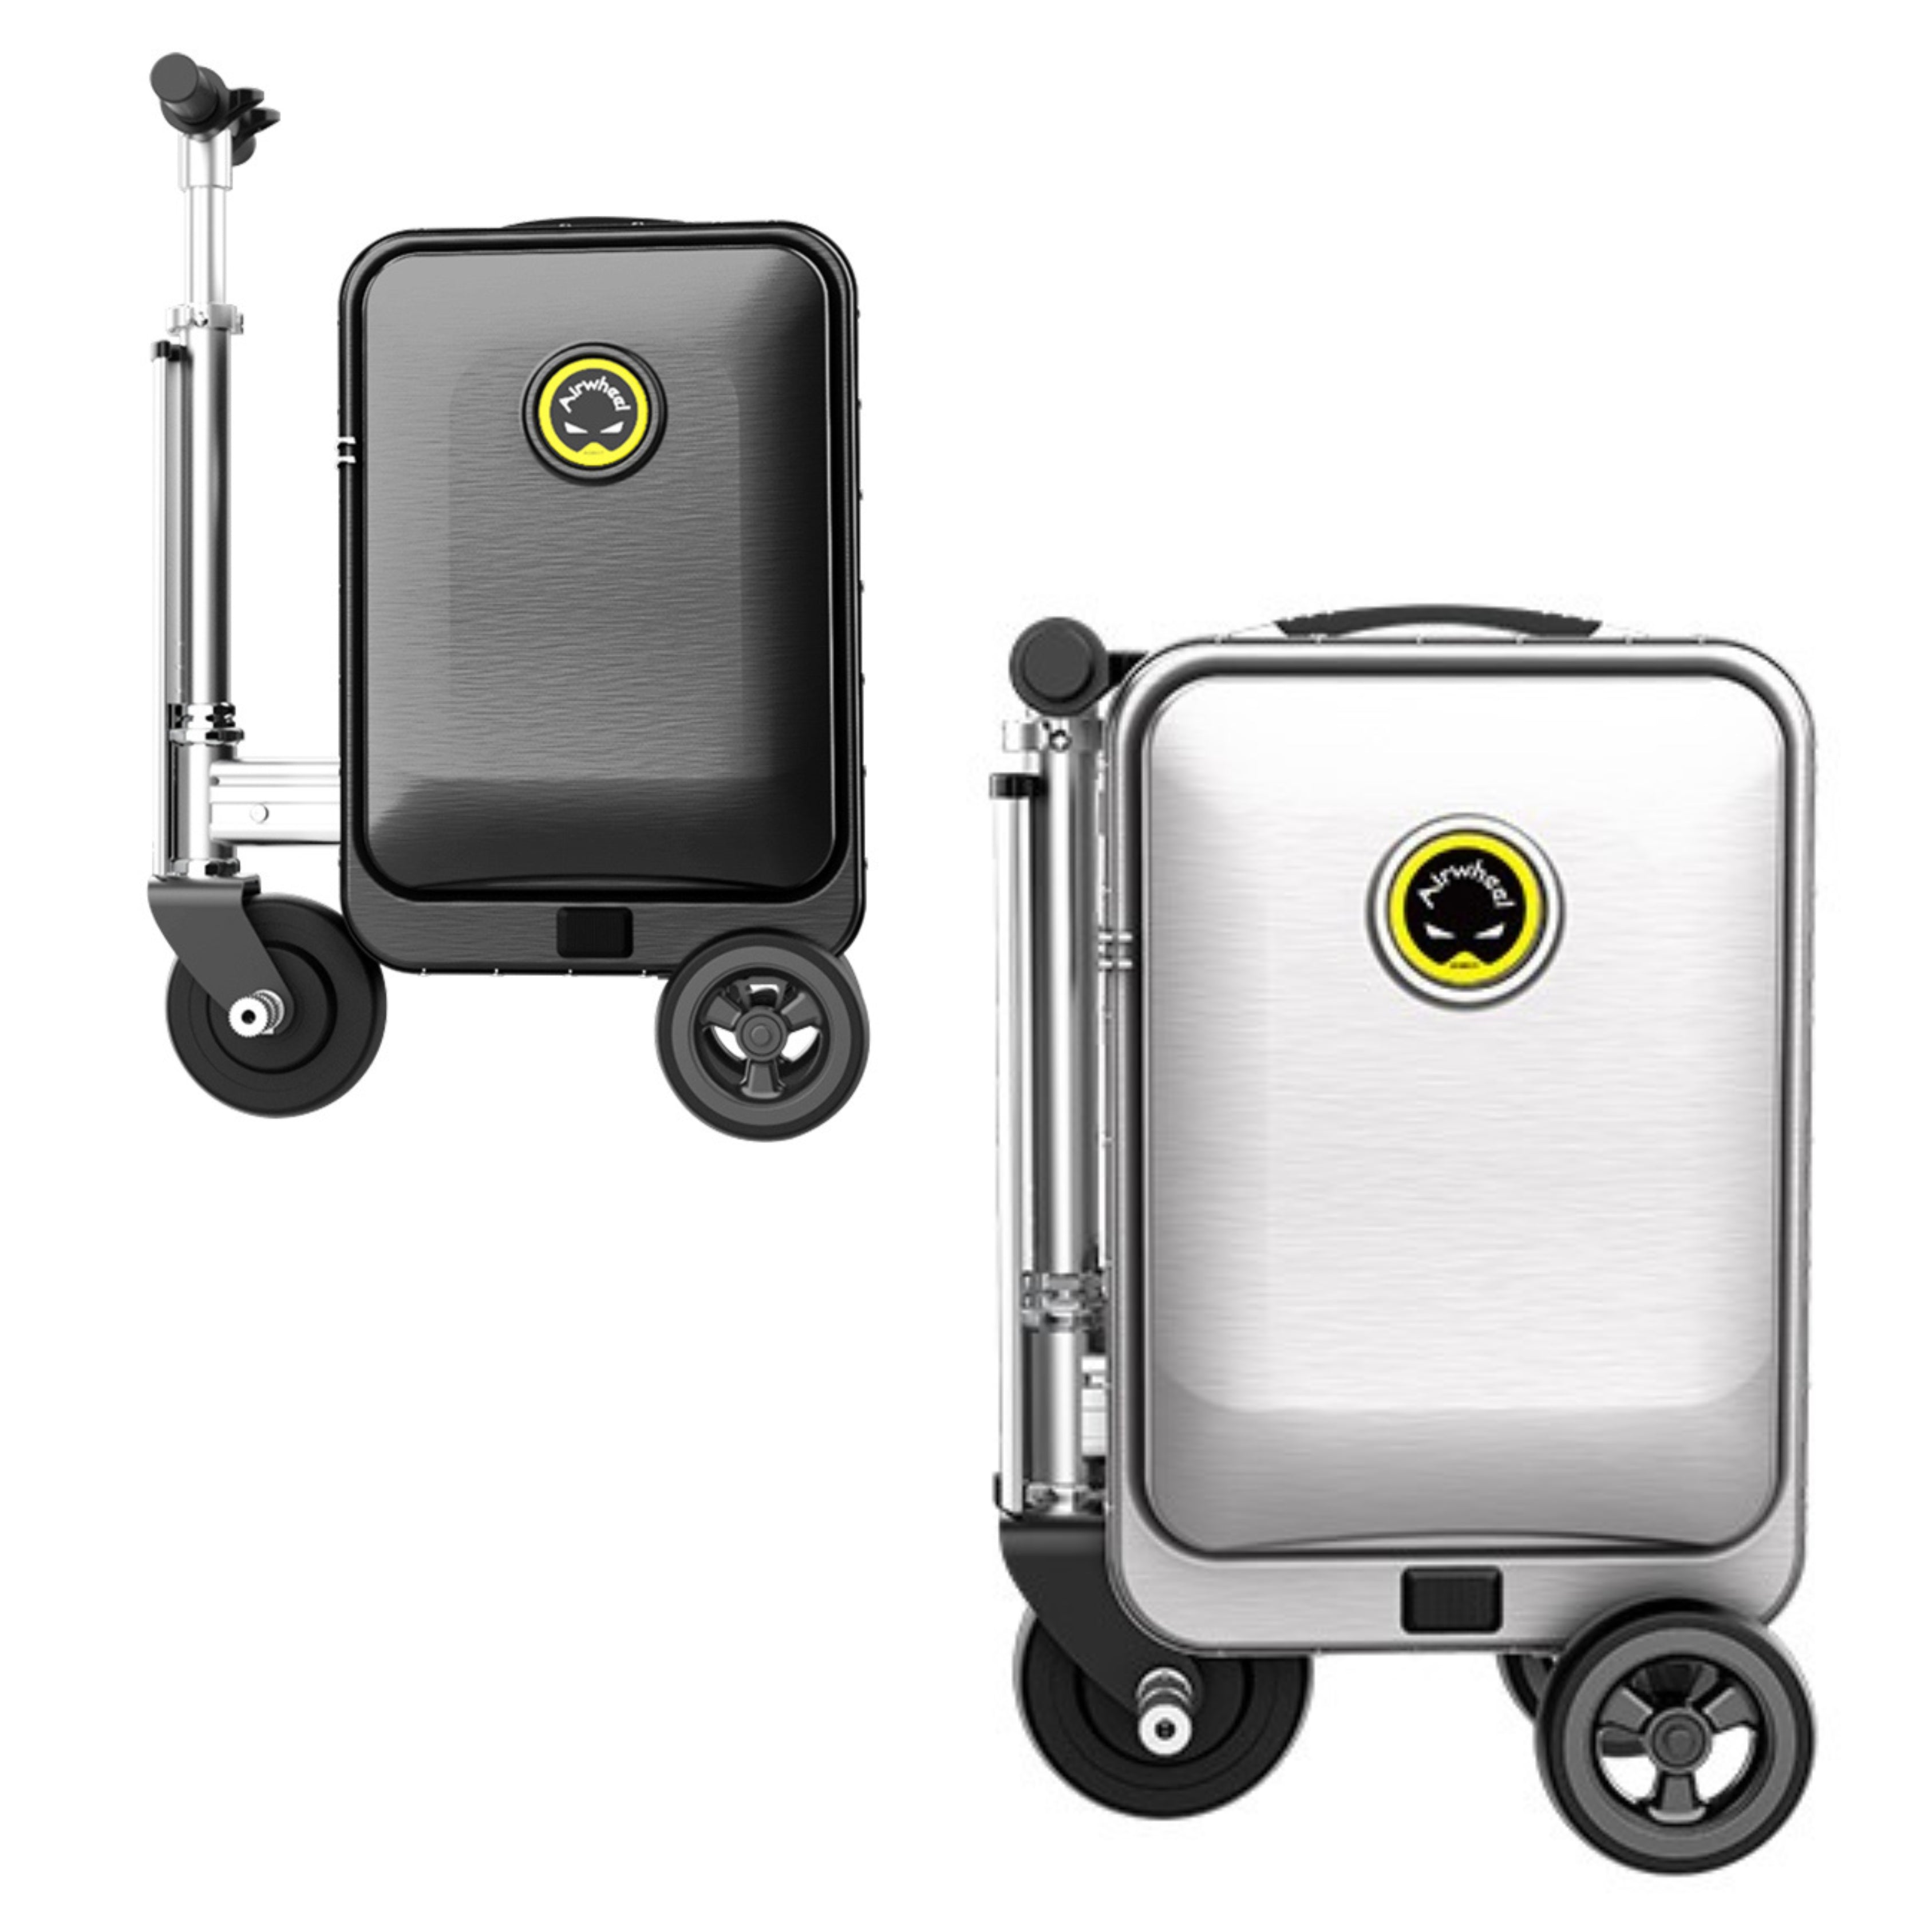 Airwheel SE3S Smart Rideable Suitcase - Home Rehab Equipment